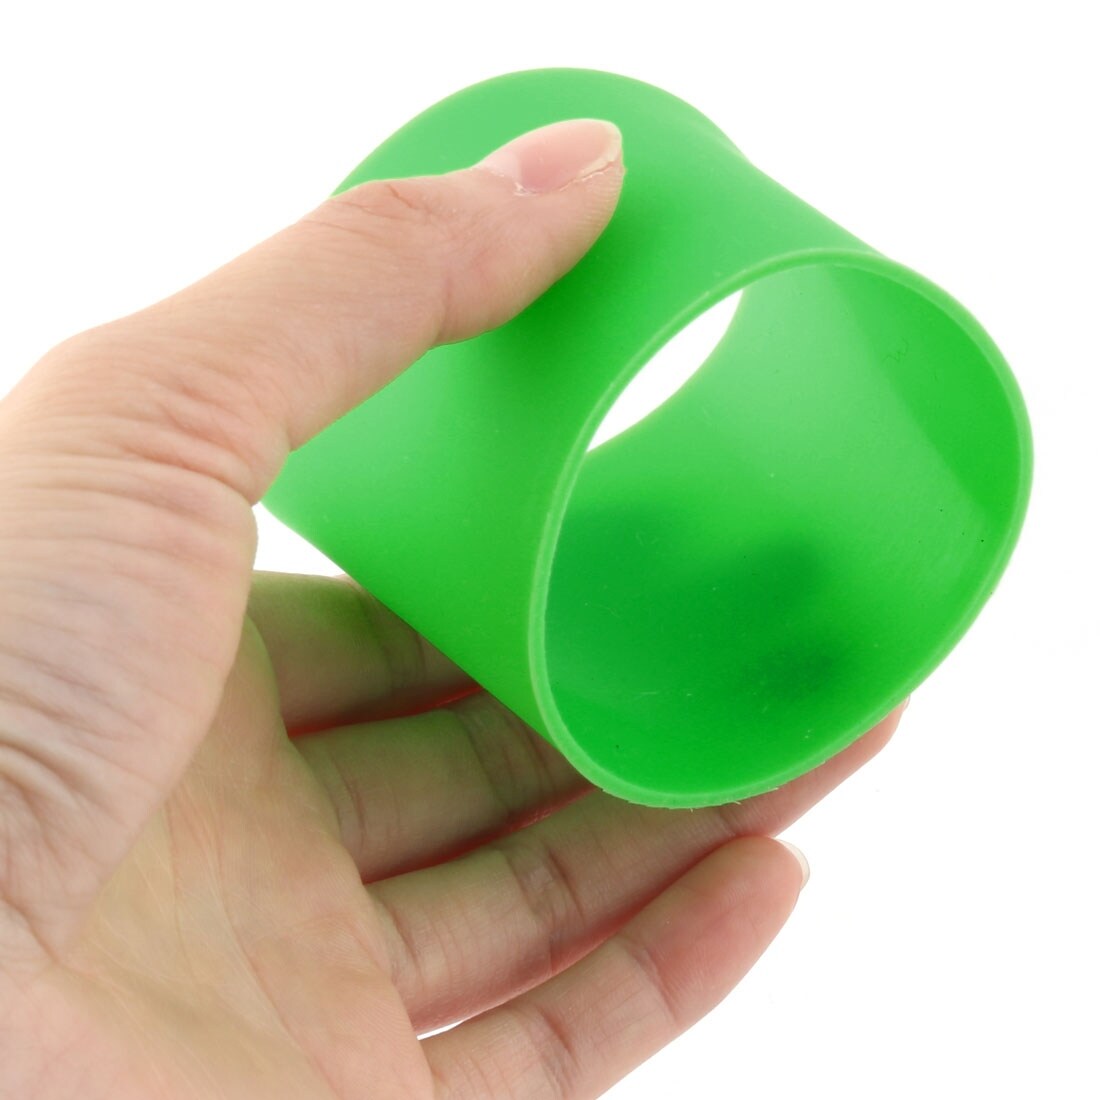 https://ak1.ostkcdn.com/images/products/is/images/direct/5c0ded92cdbab3dc14850c48ea8ebedb923afe8f/Silicone-Expandable-Reusable-Heat-Resistant-Glass-Bottle-Mug-Cup-Sleeve-Green.jpg